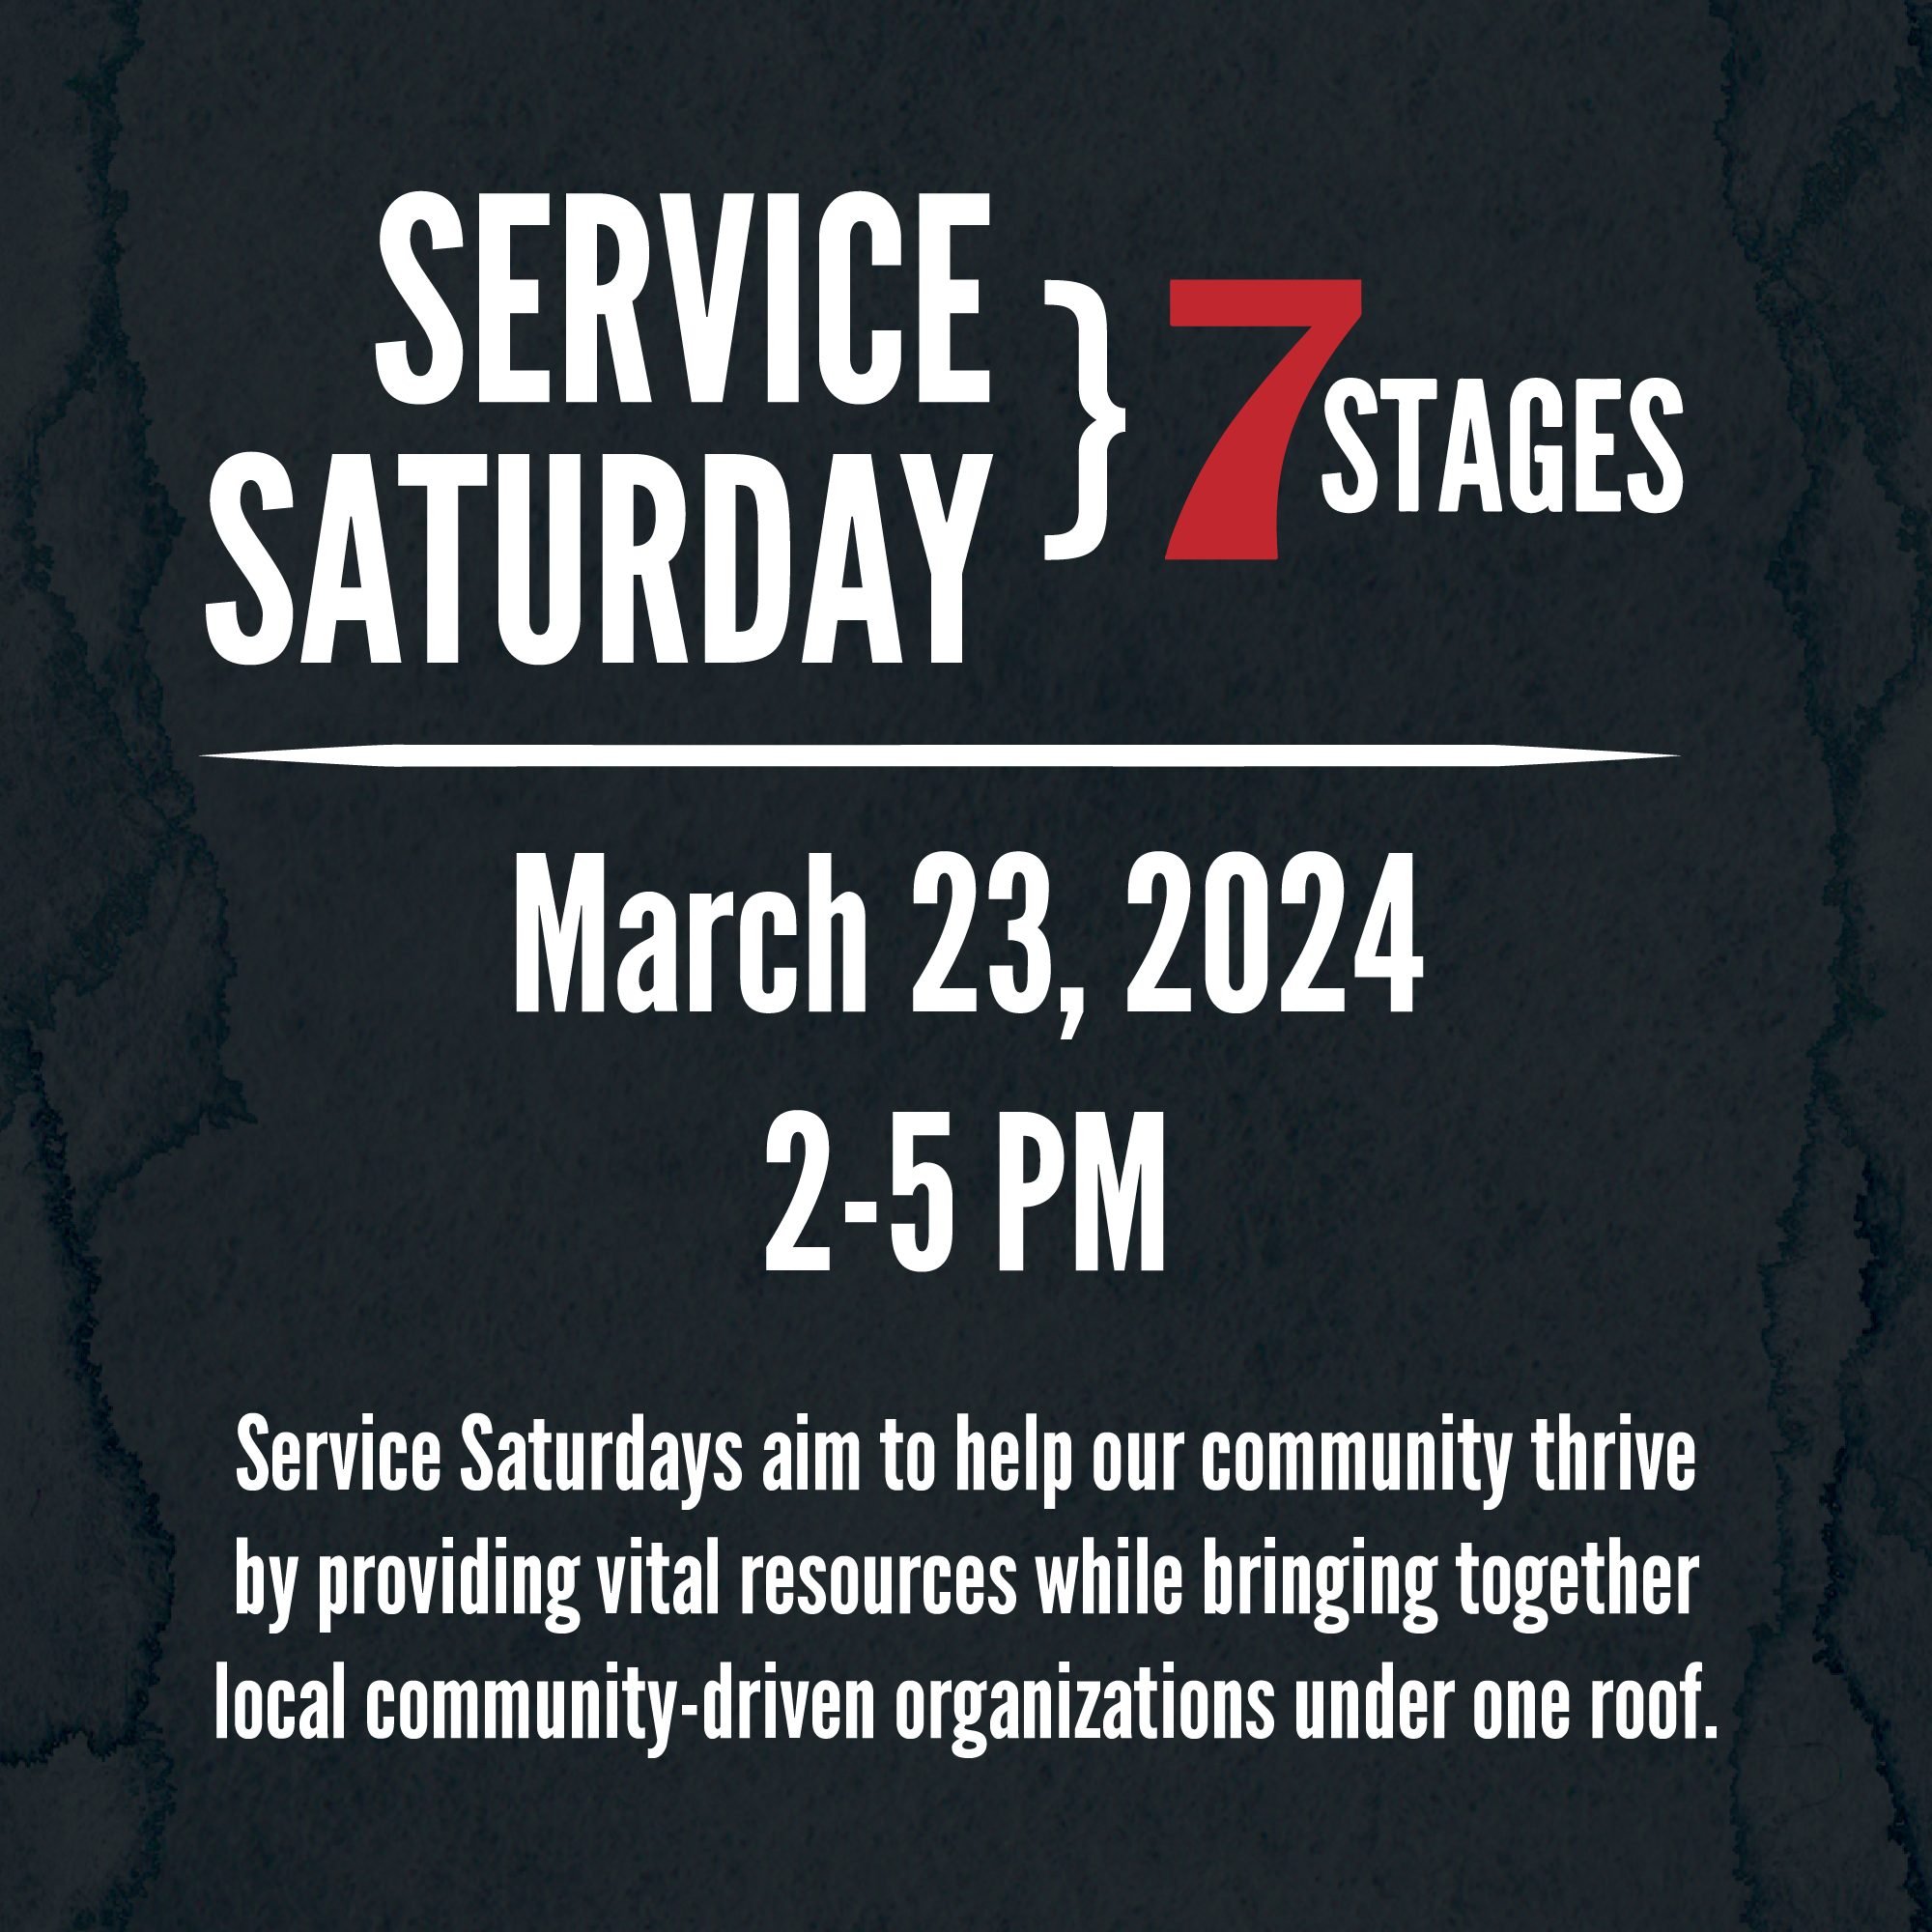 Service Saturday at 7 Stages March 23, 2024.